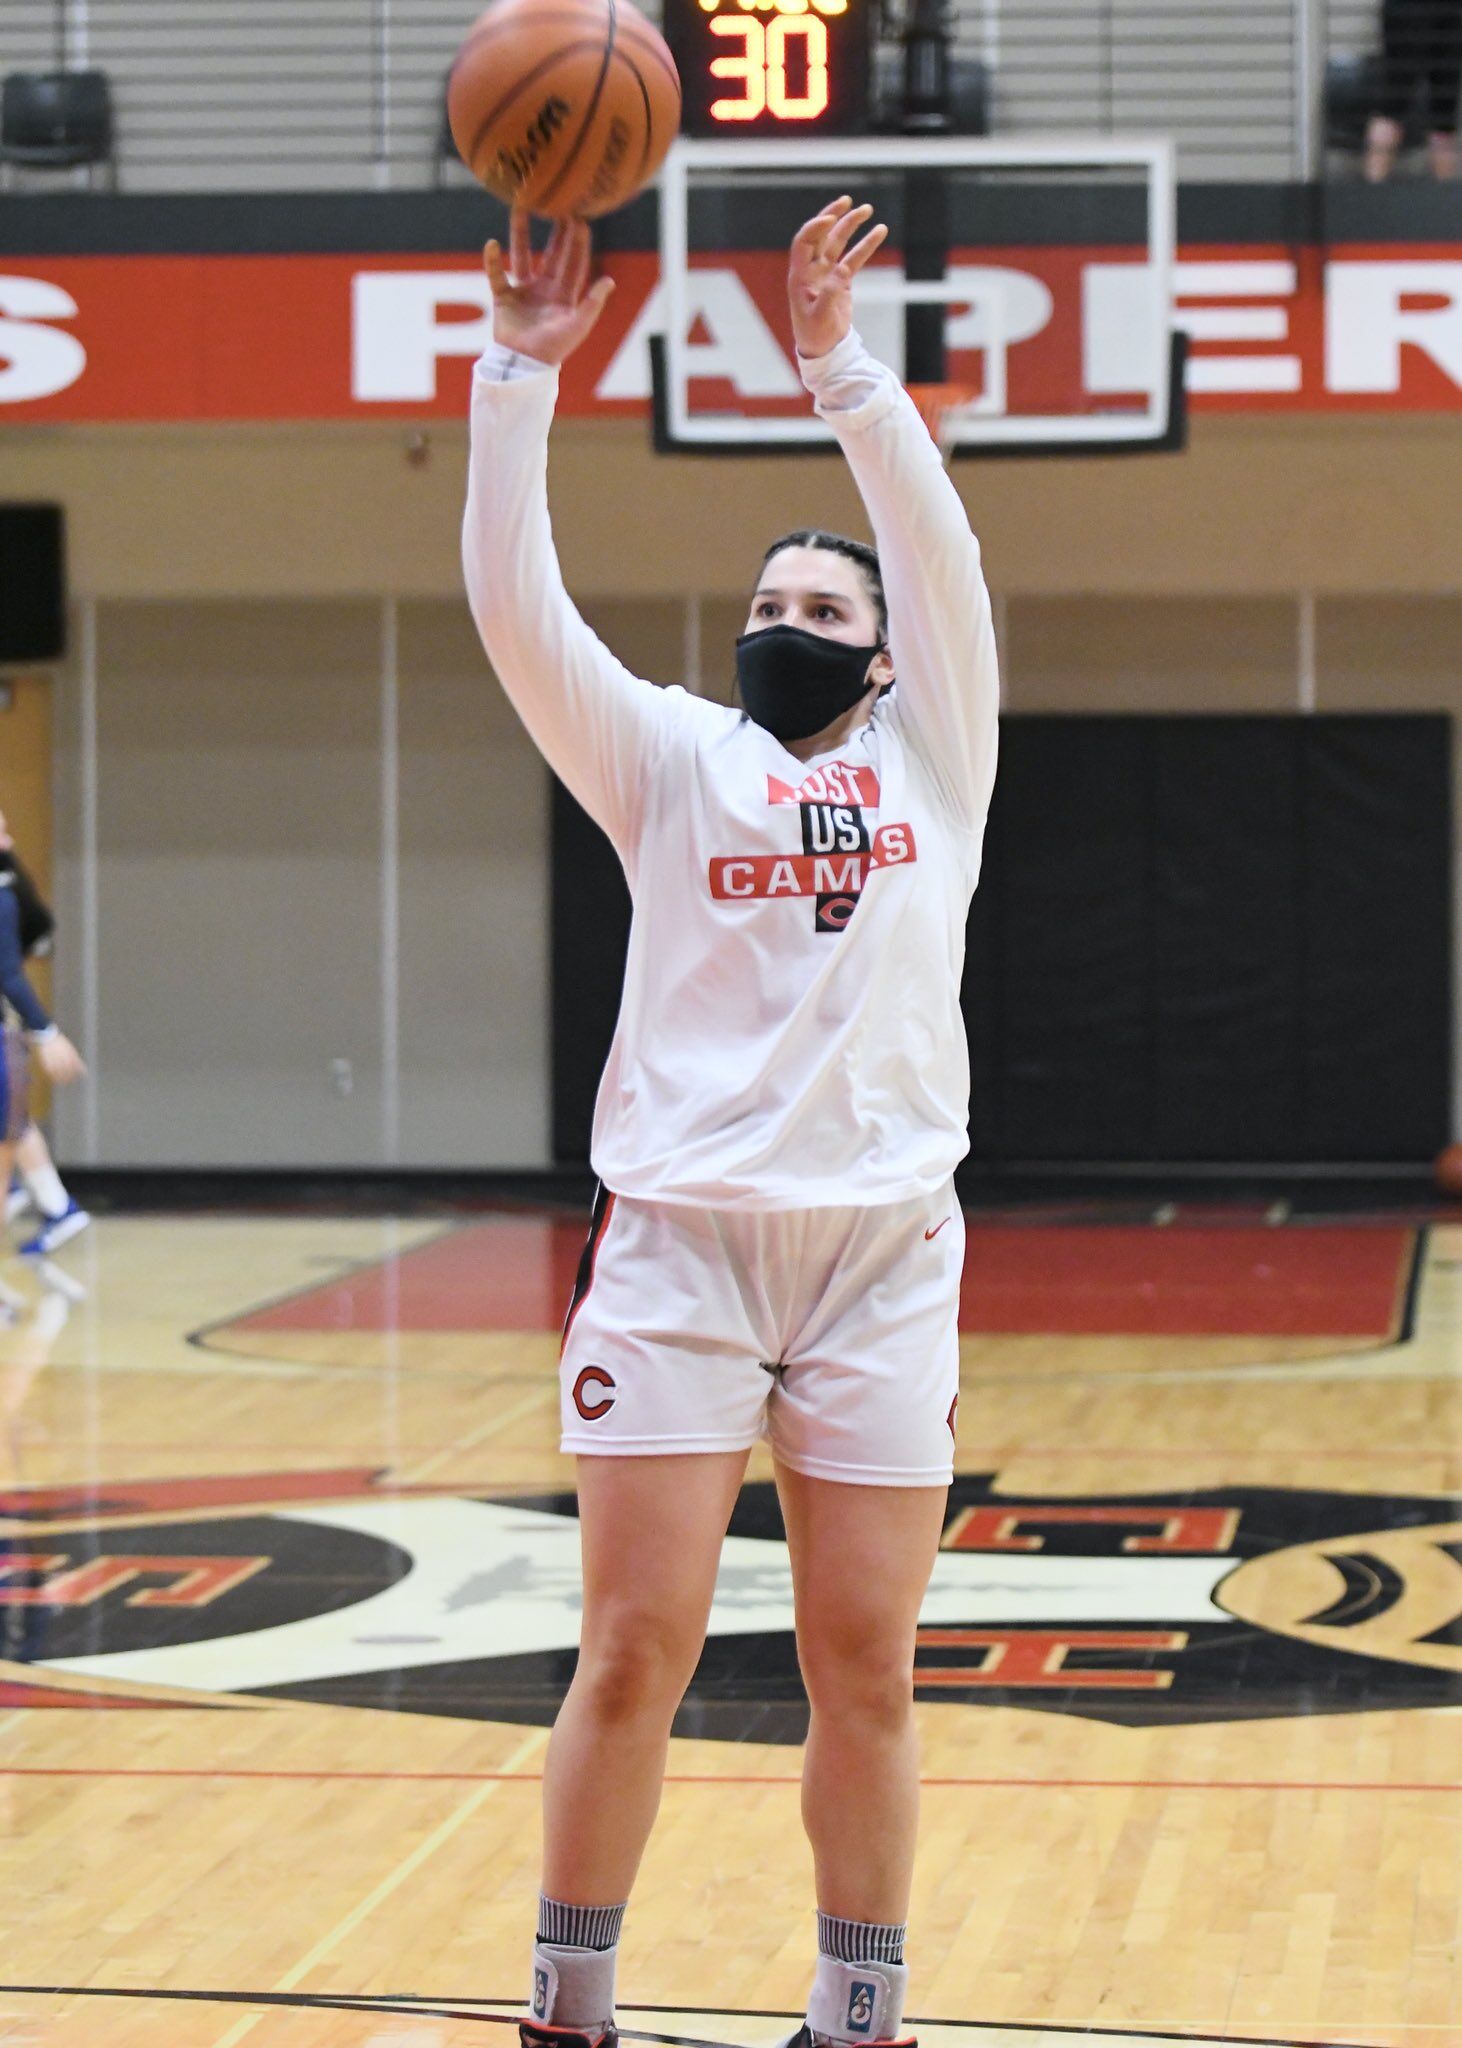 Camas senior Katelynn Forner, shown here in warm-ups earlier this season, made four consecutive 3-pointers in the first quarter Friday night against rival Union. Photo courtesy Kris Cavin